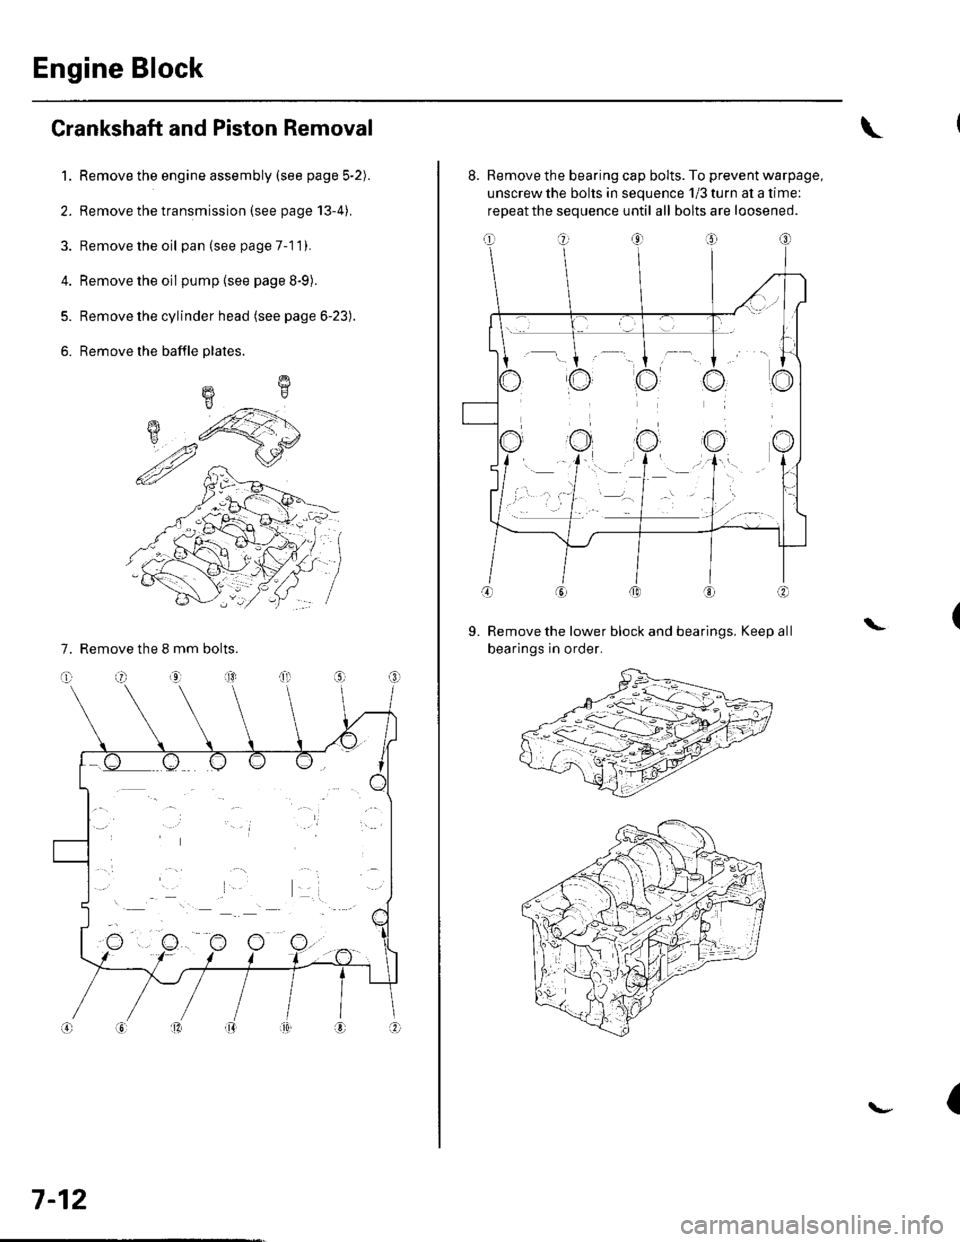 HONDA CIVIC 2003 7.G Service Manual Engine Block
Crankshaft and Piston Removal
1. Remove the engine assembly (see page 5-2).
2. Remove the transmission (see page 13-4).
3. Remove the oil pan (see page 7-1 1).
4. Remove the oil pump {see